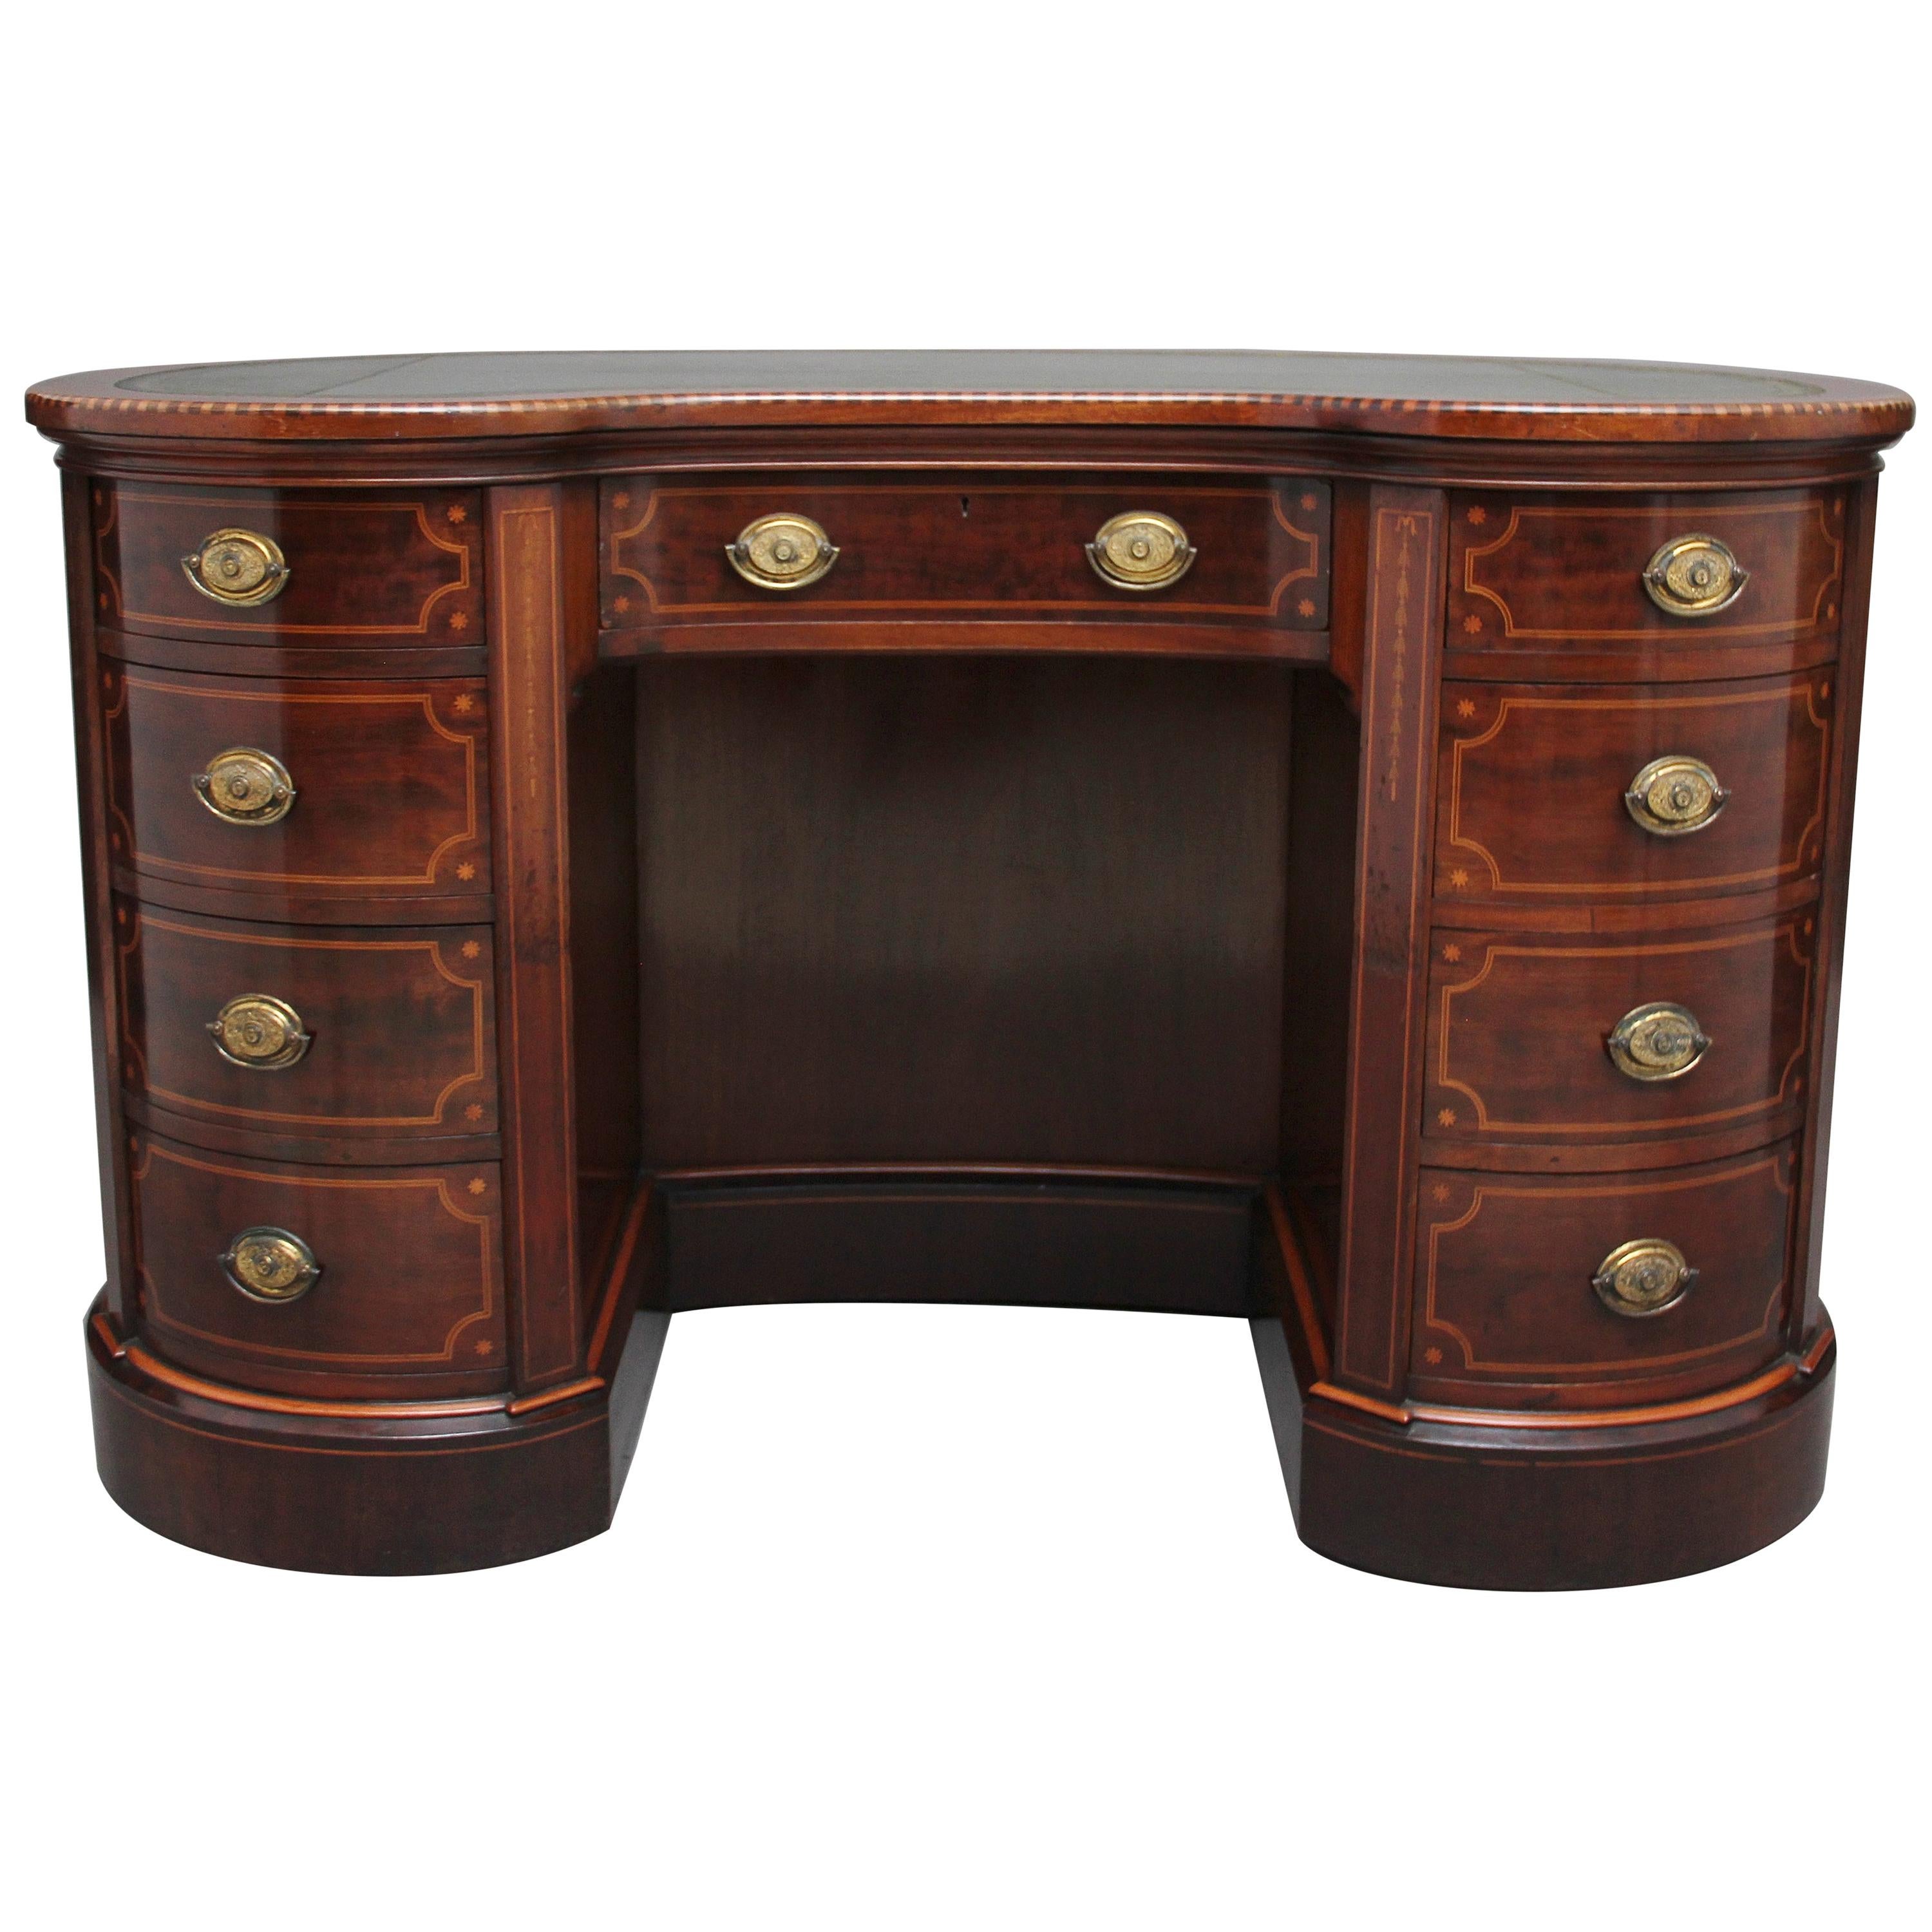 19th Century Inlaid Mahogany Kidney Shaped Desk with a Wonderful Provenance